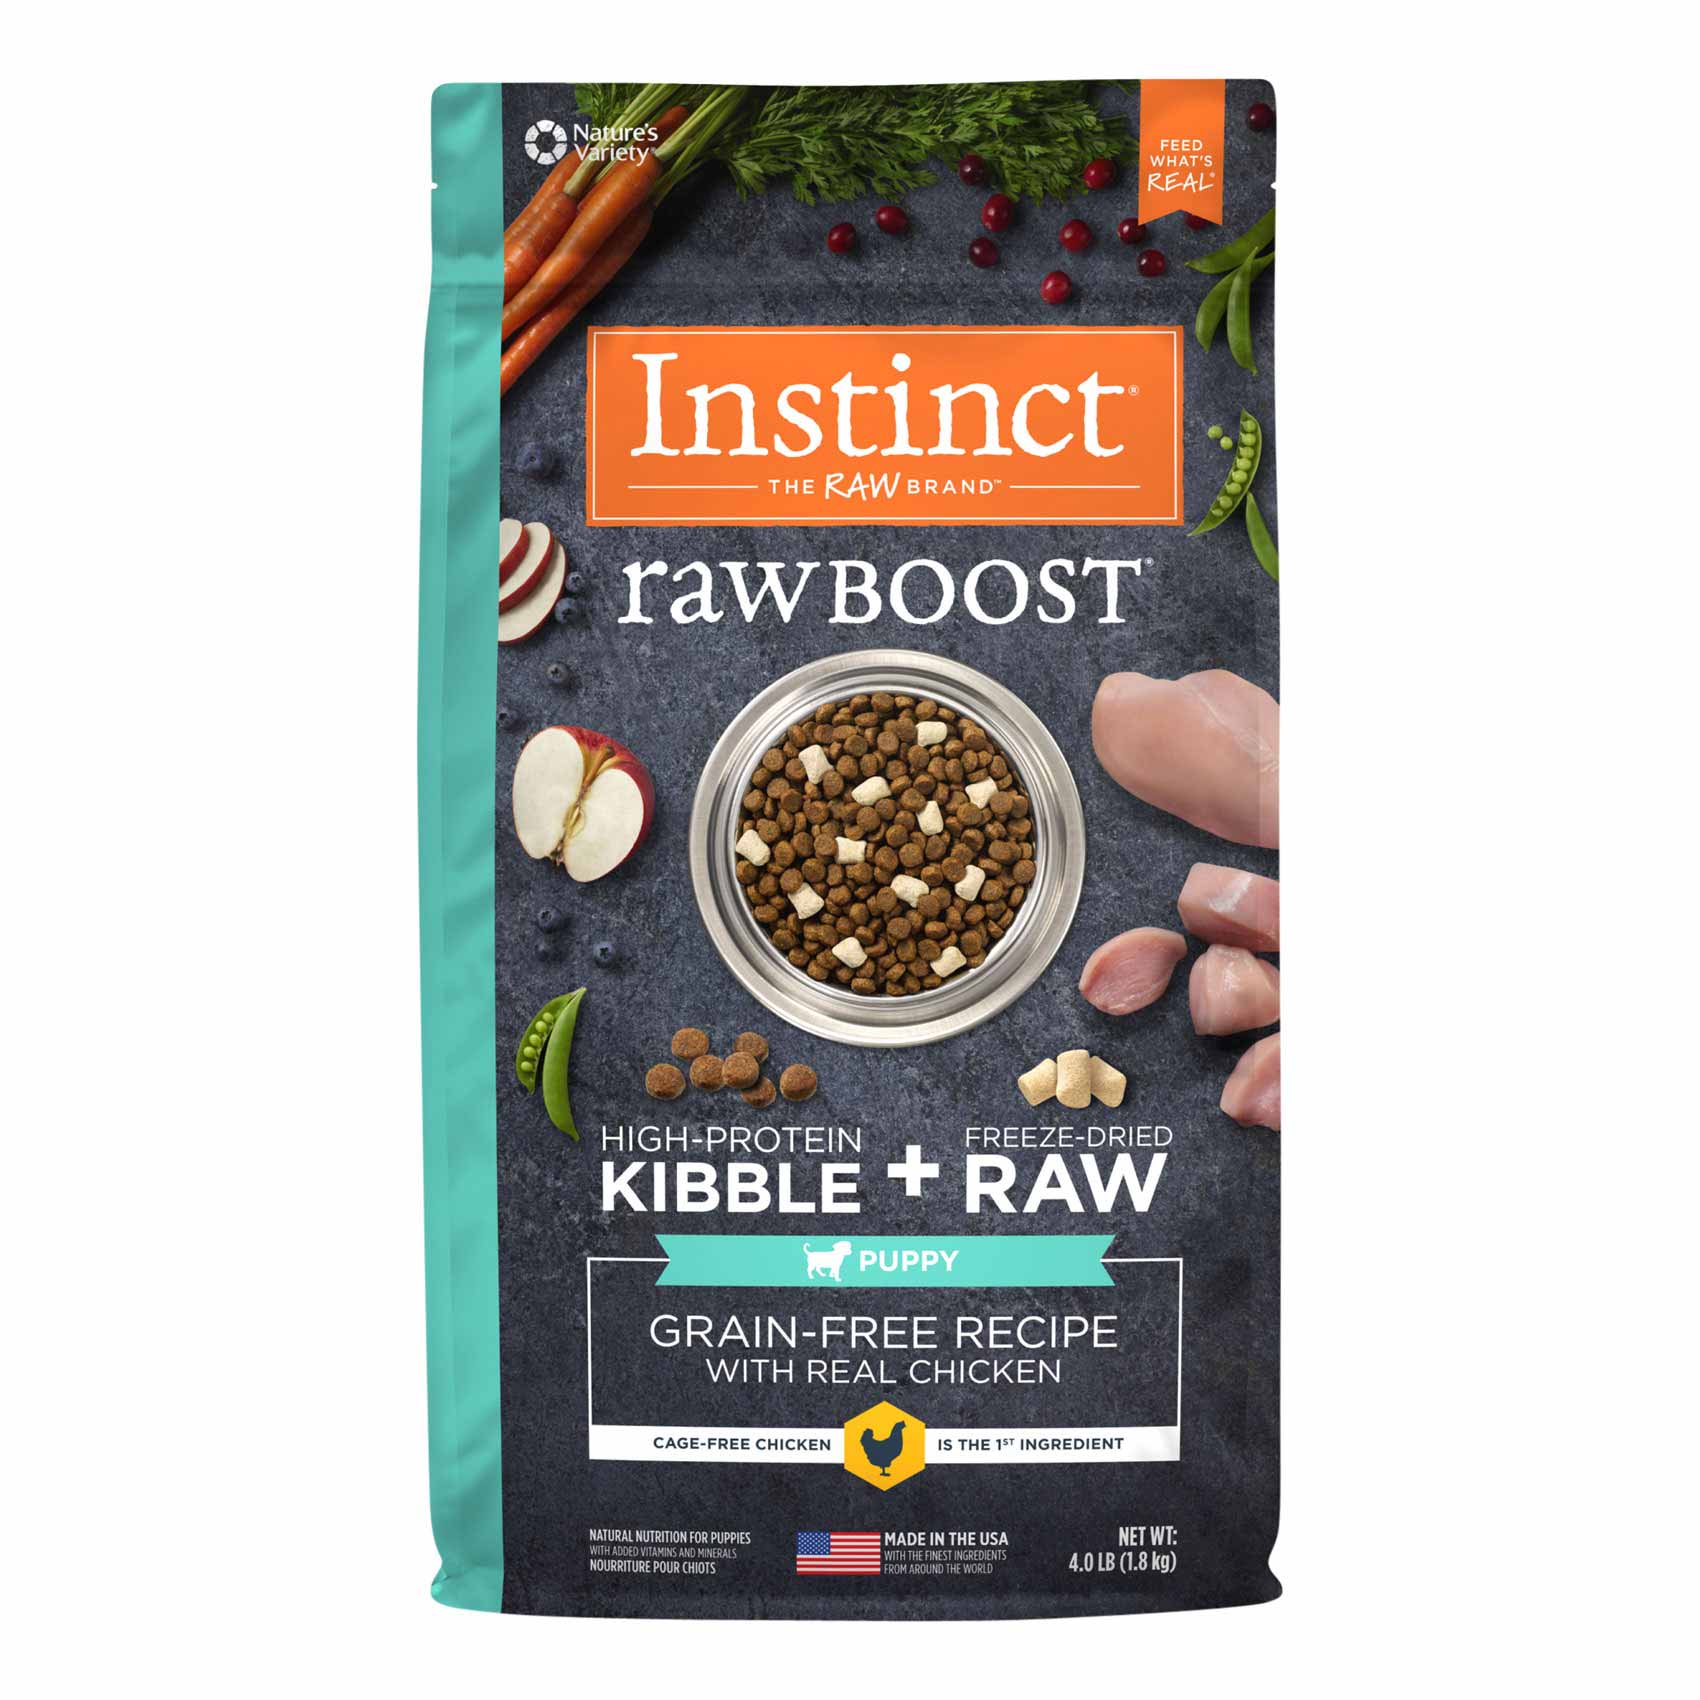 Instinct Raw Boost Puppy Grain-Free Recipe with Real Chicken Dry Dog Food with Freeze-Dried Raw Pieces, 4 Pound Bag